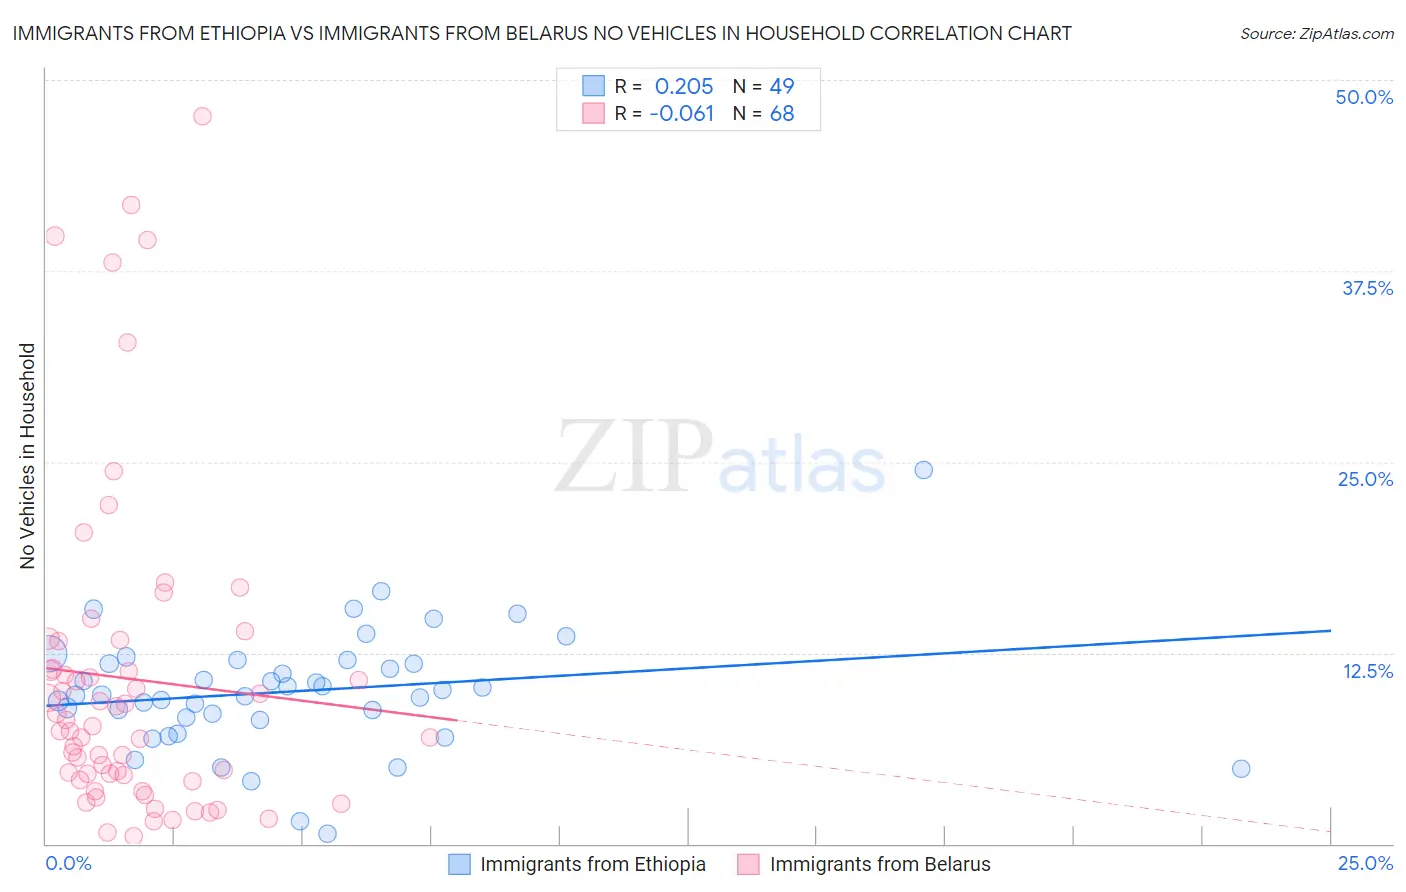 Immigrants from Ethiopia vs Immigrants from Belarus No Vehicles in Household